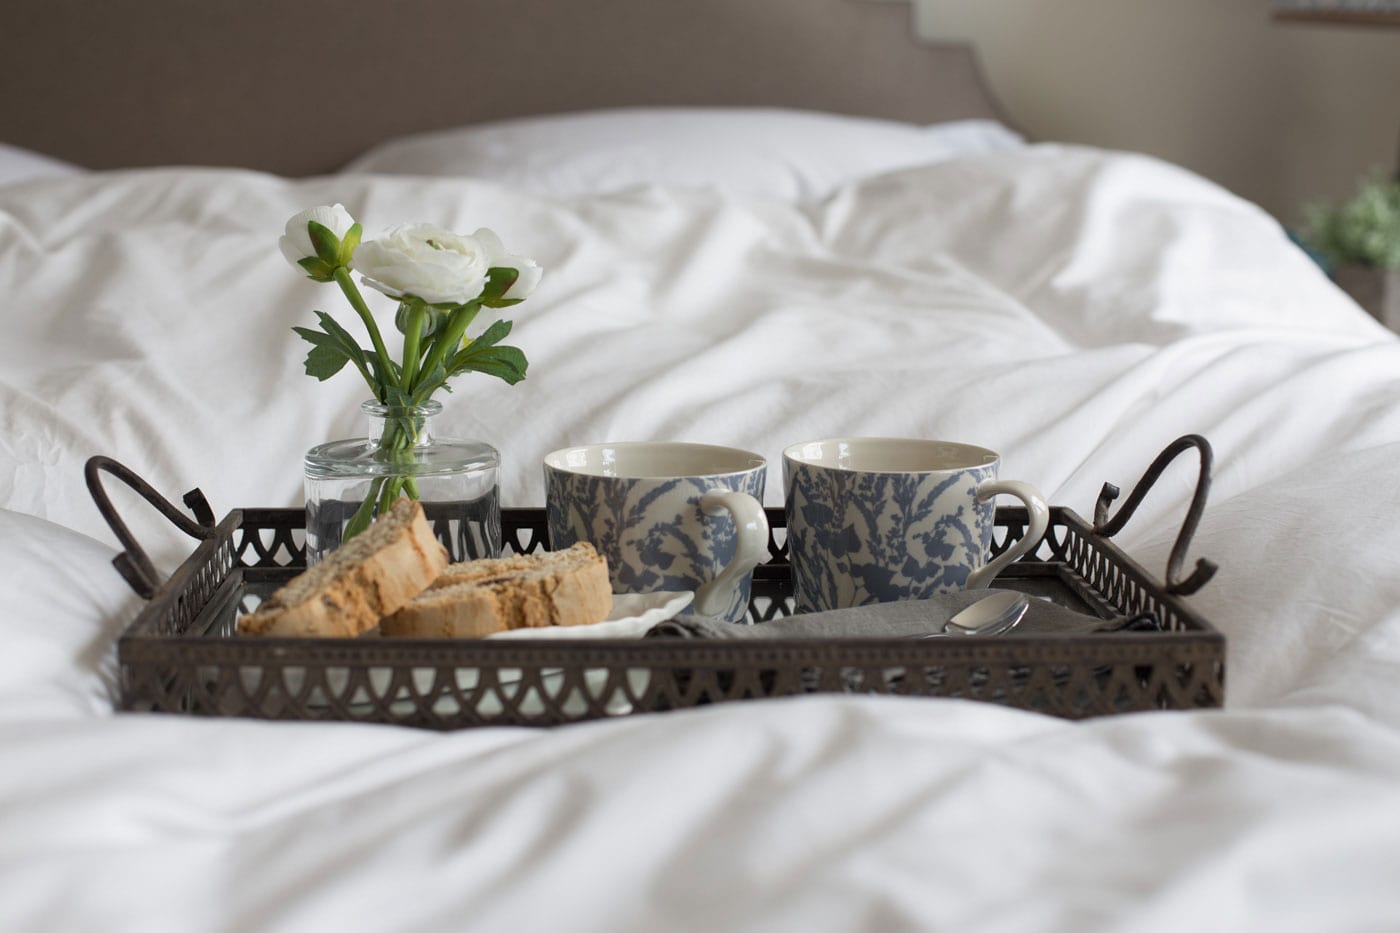 Linen vs Cotton Bedding: Which is Right for You? – City Mattress